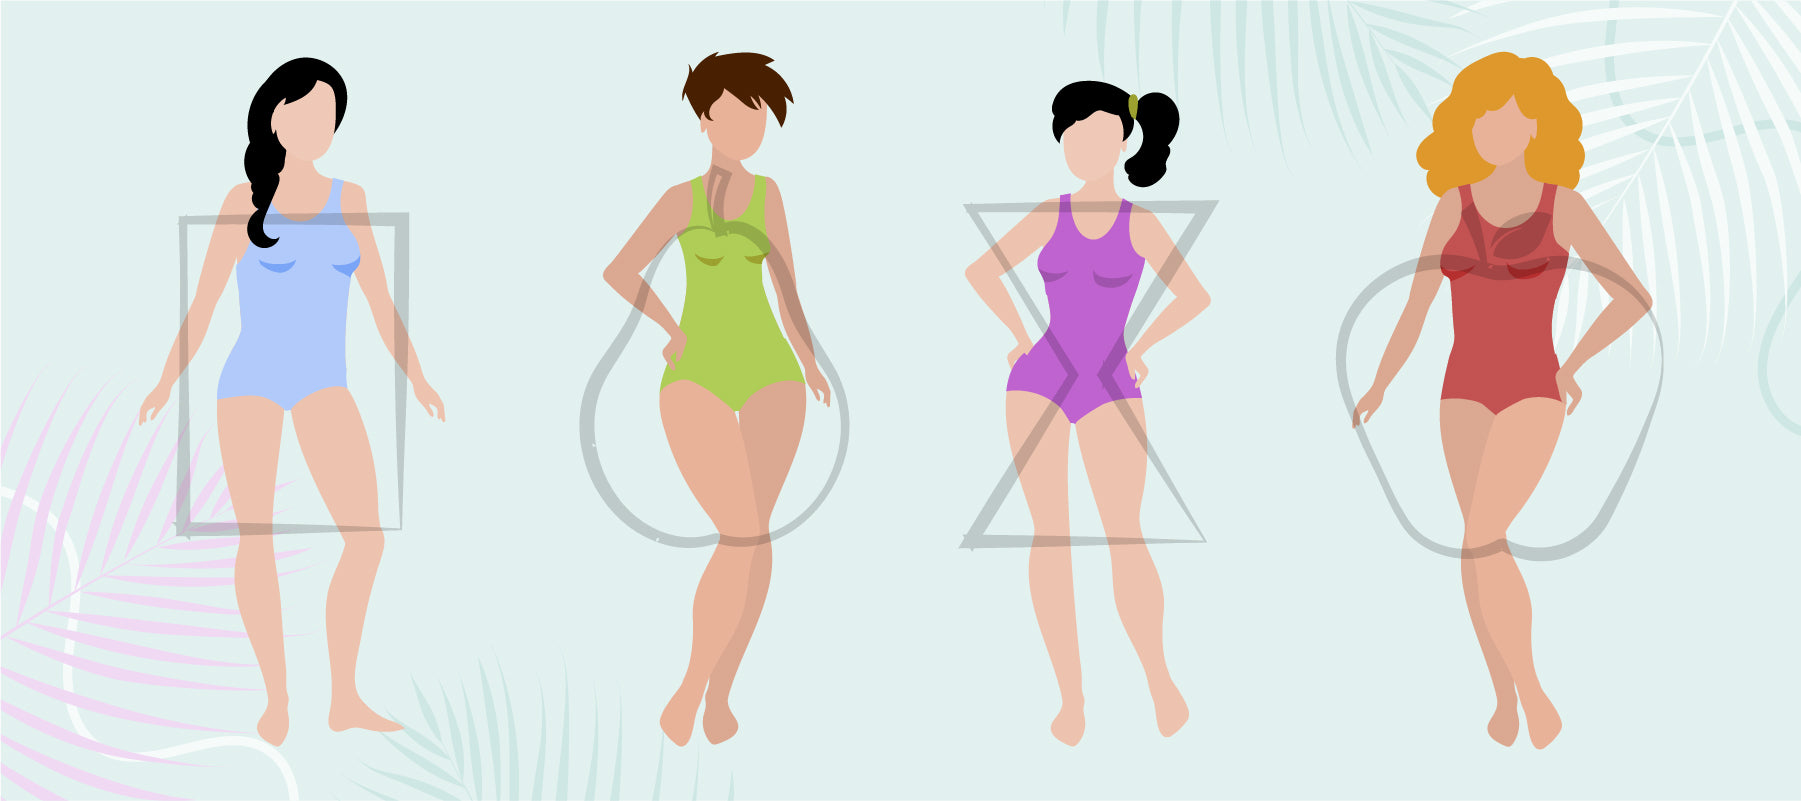 Female Body Types : Woman Body Shapes and Clothing - HubPages